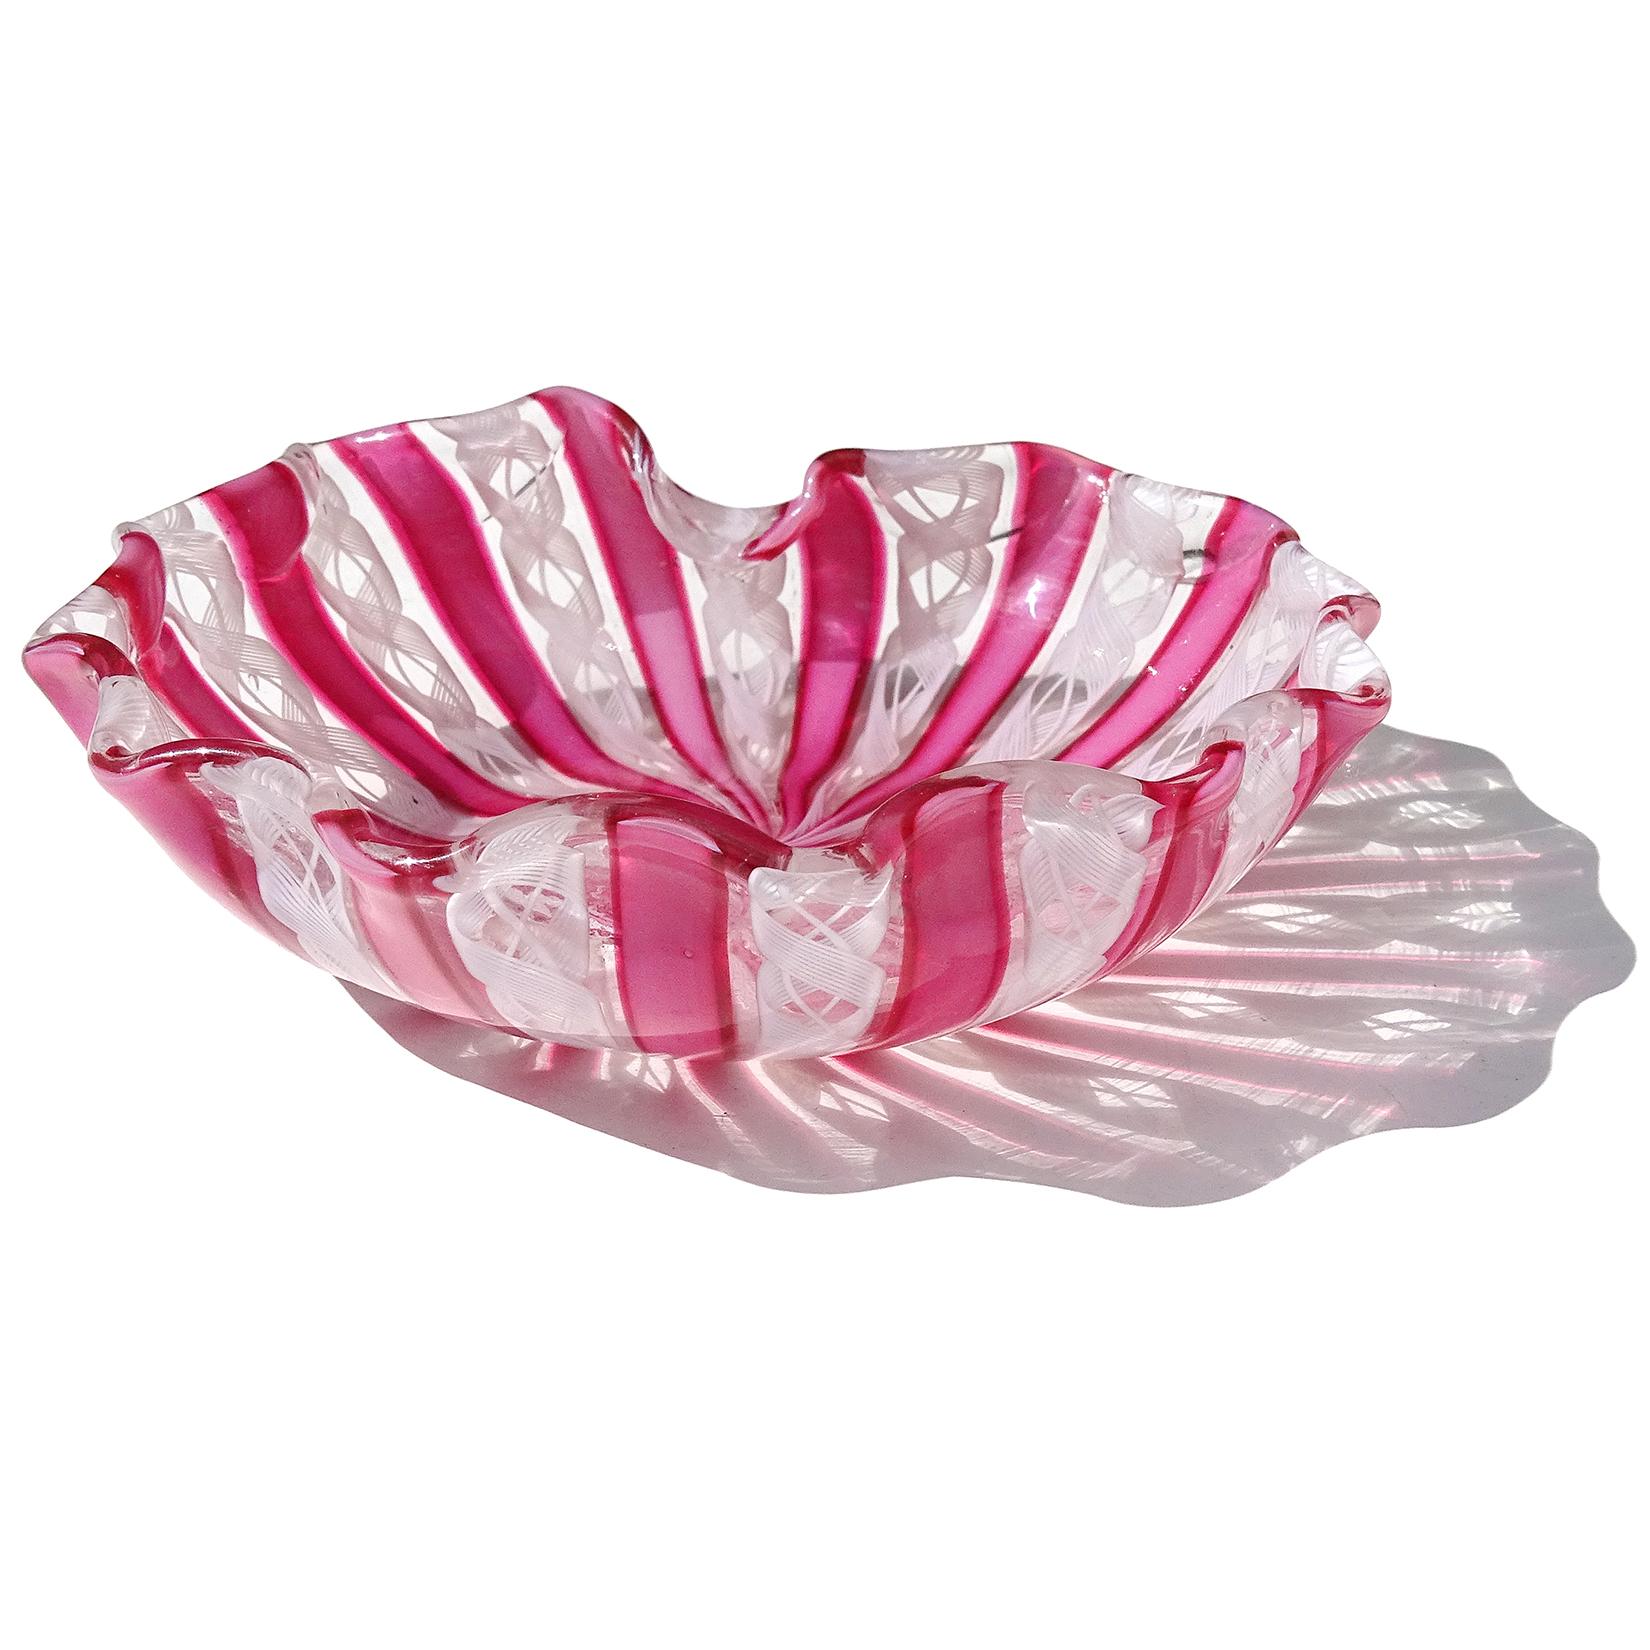 Hand-Crafted Fratelli Toso Murano Pink White Ribbons Italian Art Glass Decorative Dish Bowl For Sale